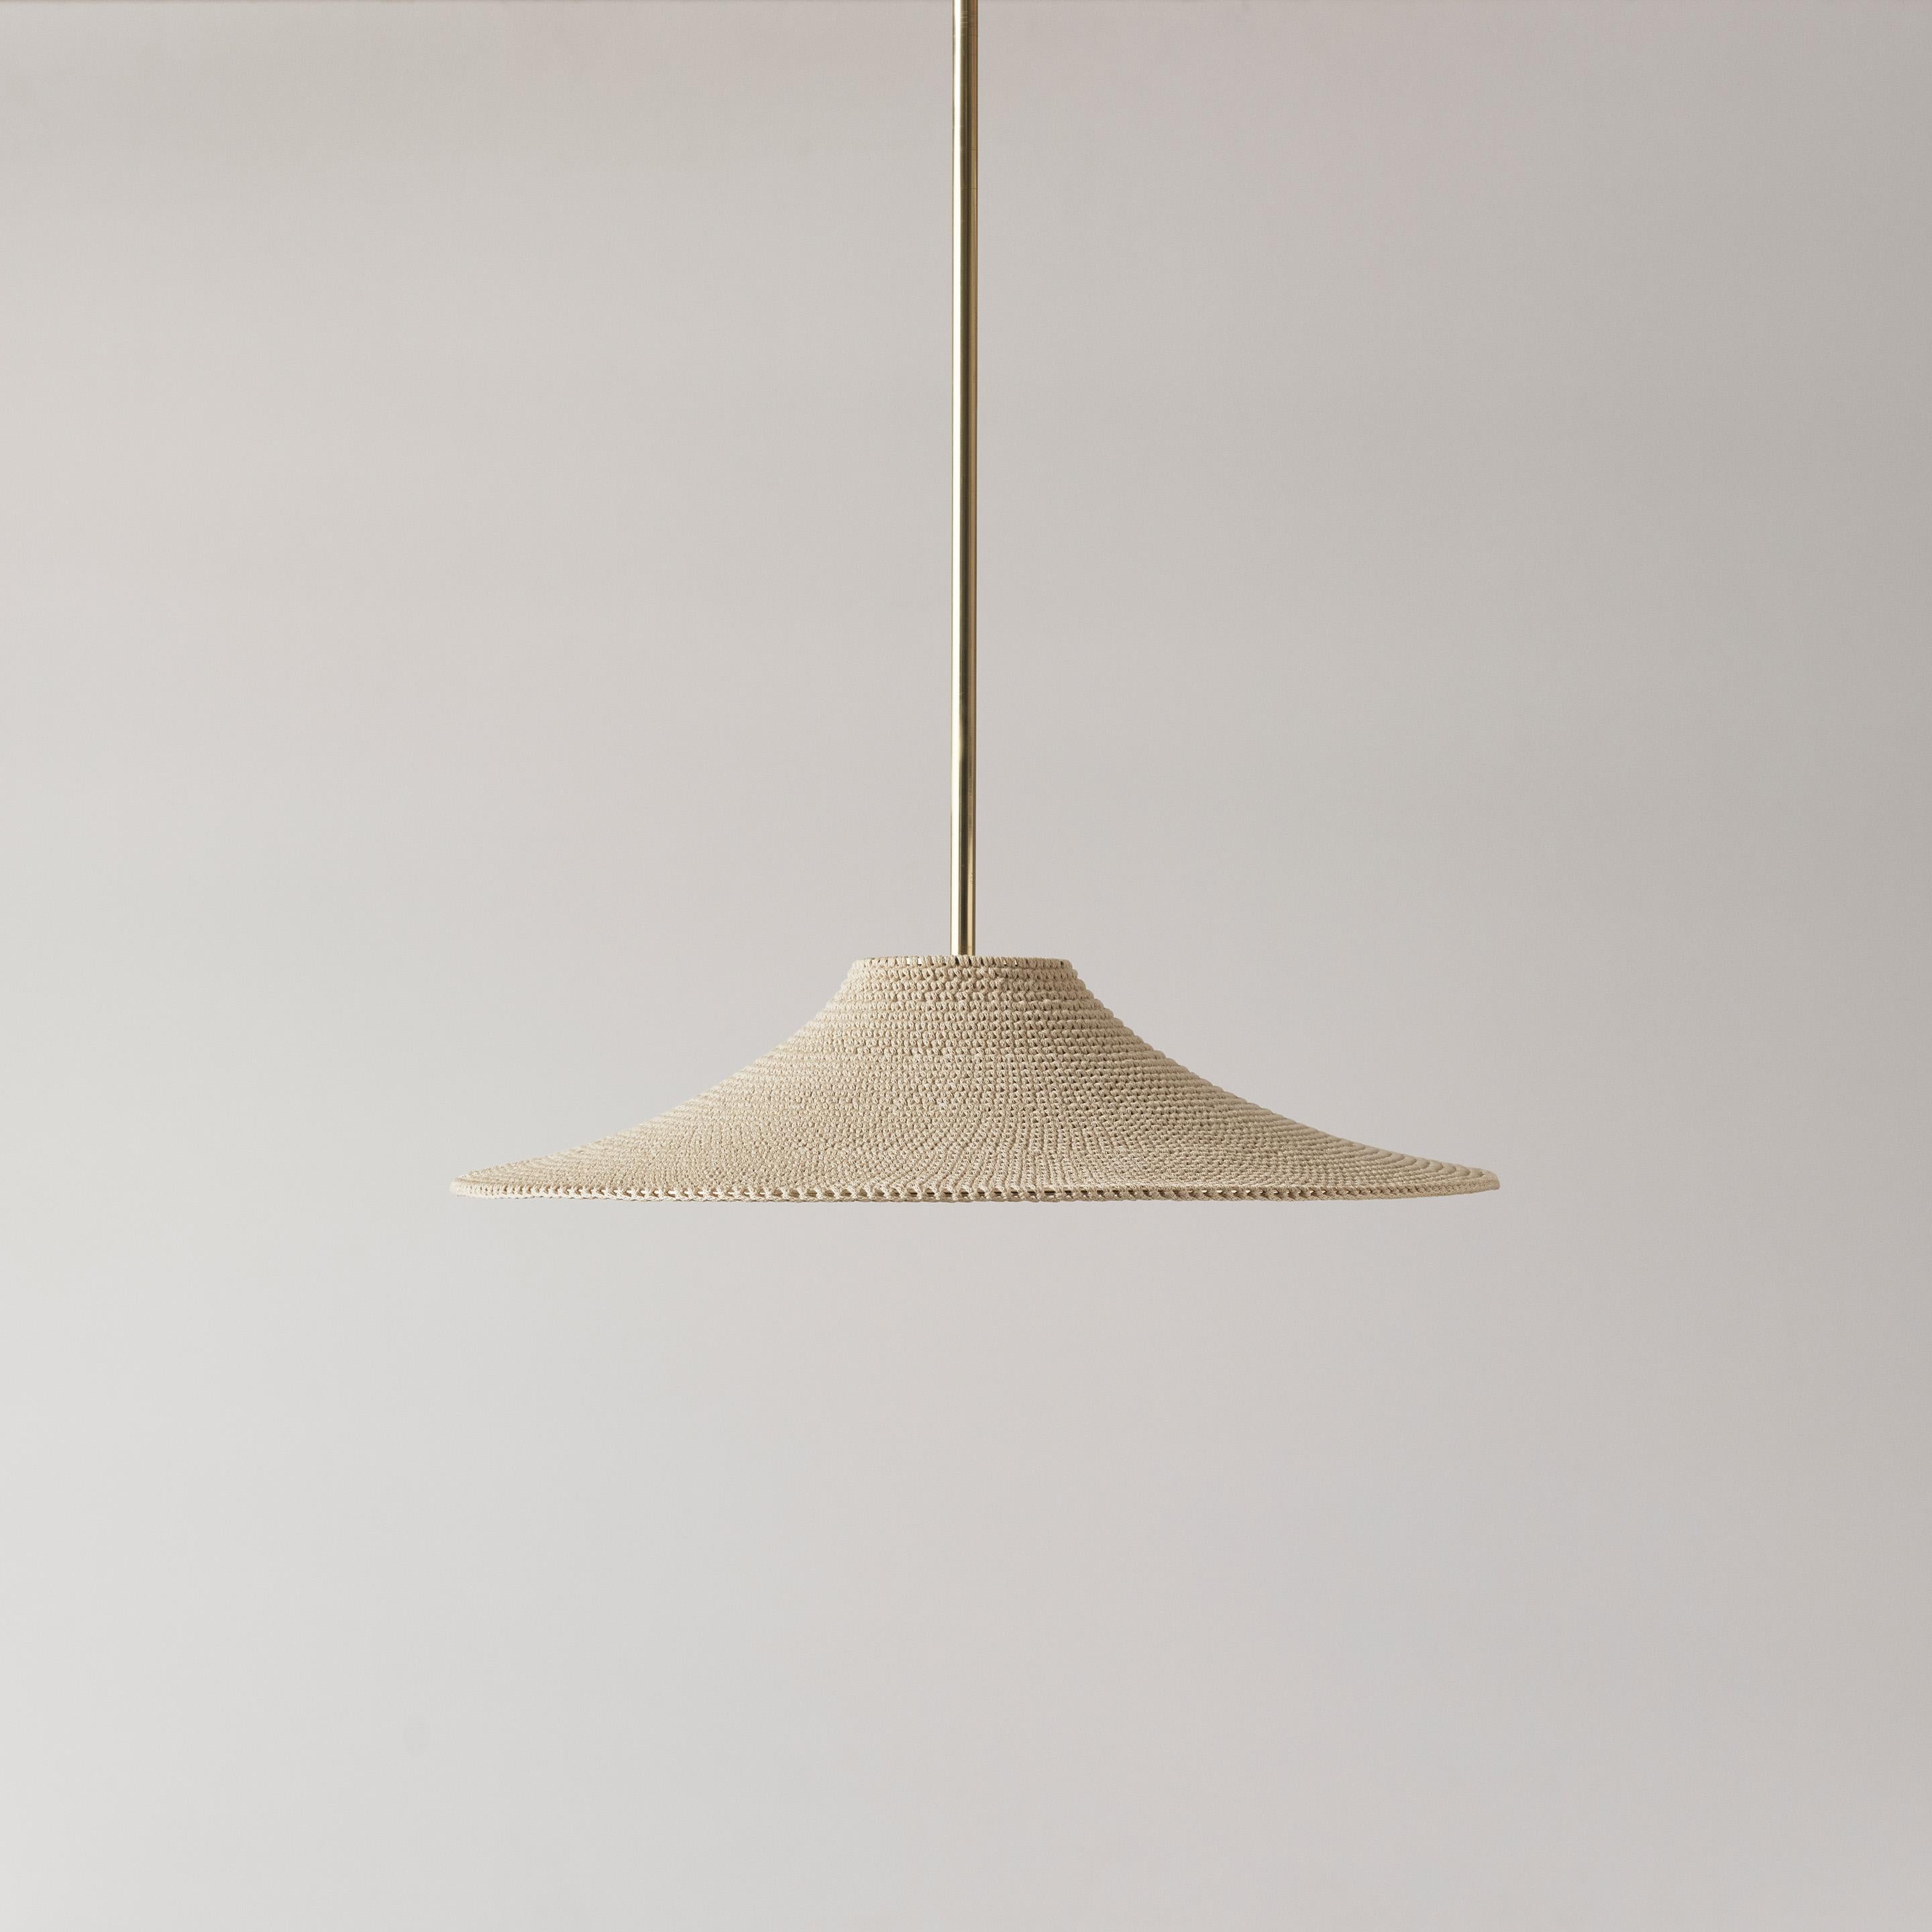 A versatile direct overhead light. In its larger size, Simple Shade 01 makes an elegant centre piece for social spaces. SS01 is perfect suspended low for lighting intimate spaces.

Each Naomi Paul pendant and lighting design is crafted entirely by